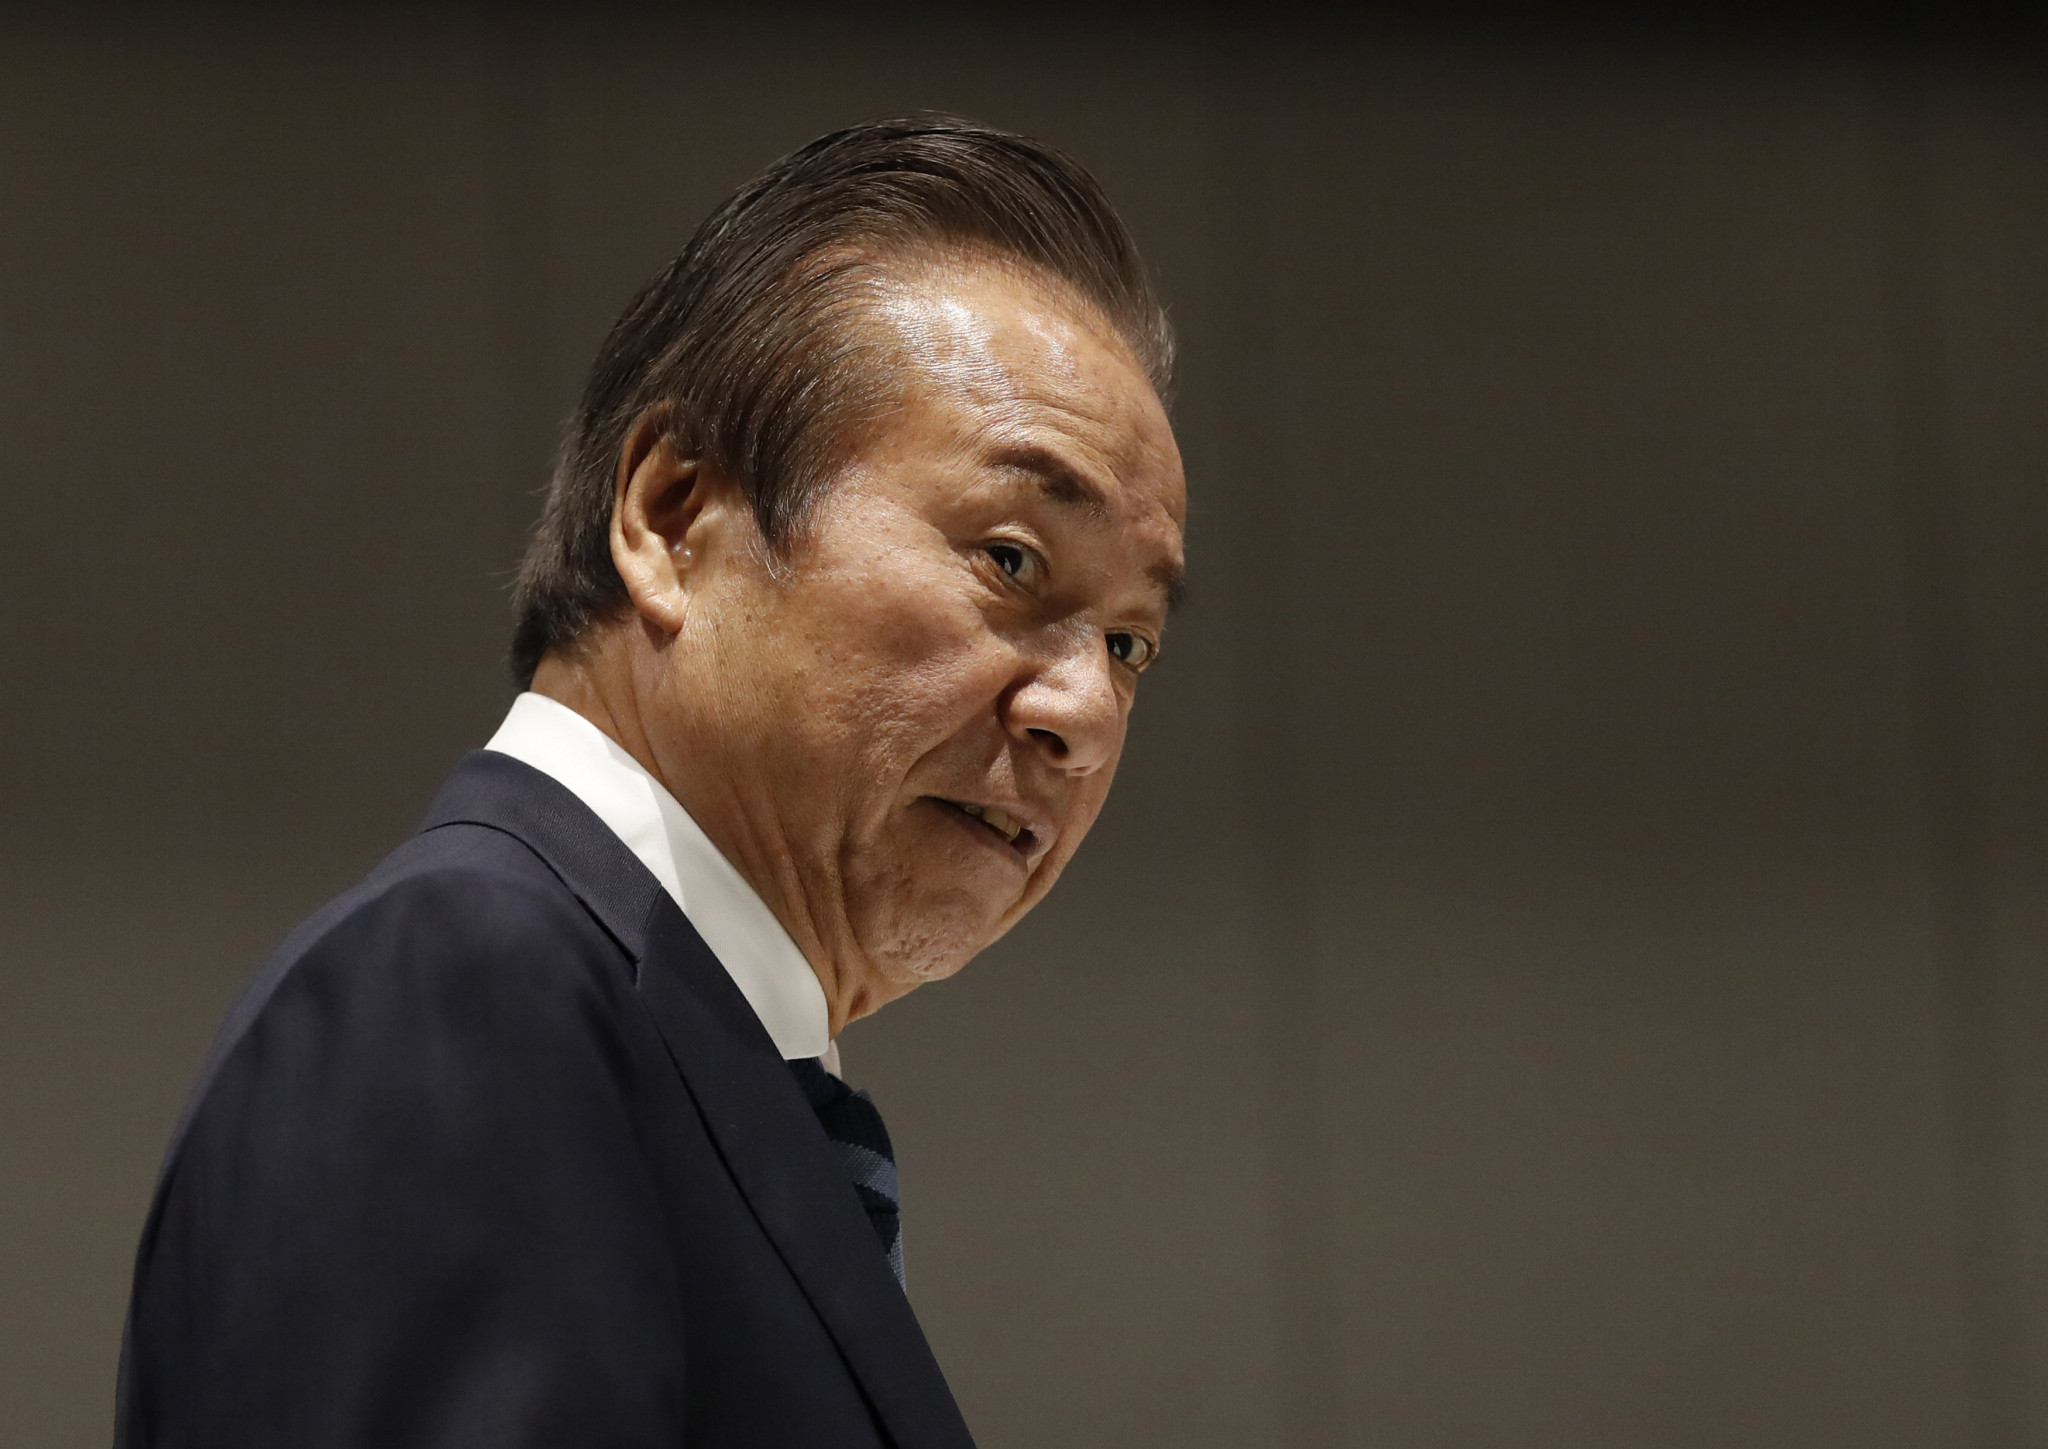 Former Tokyo 2020 Board member Haruyuki Takahashi has been arrested by Japanese authorities on bribery allegations ©Getty Images